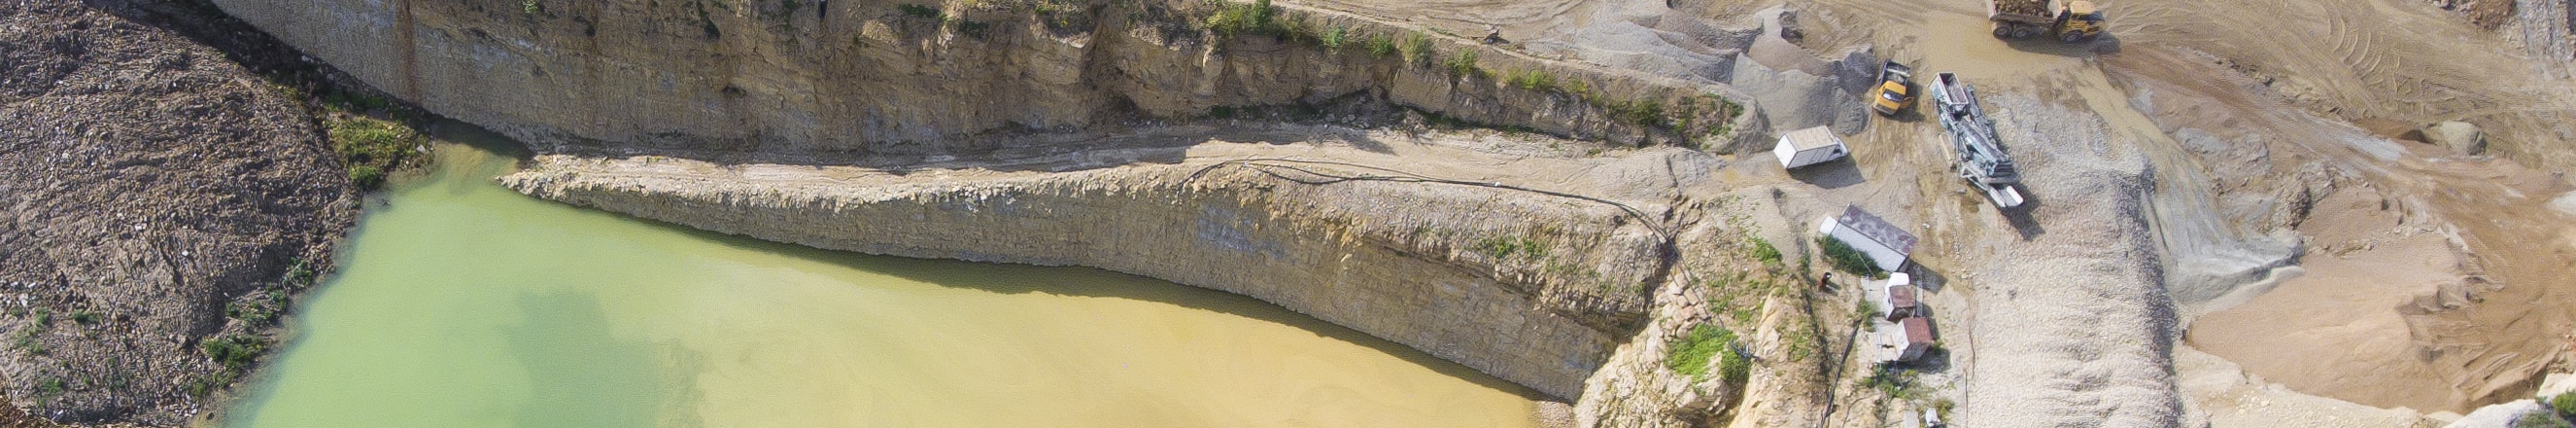 Barrick Gold's mining operations deprived local communities from clean and healthy environment